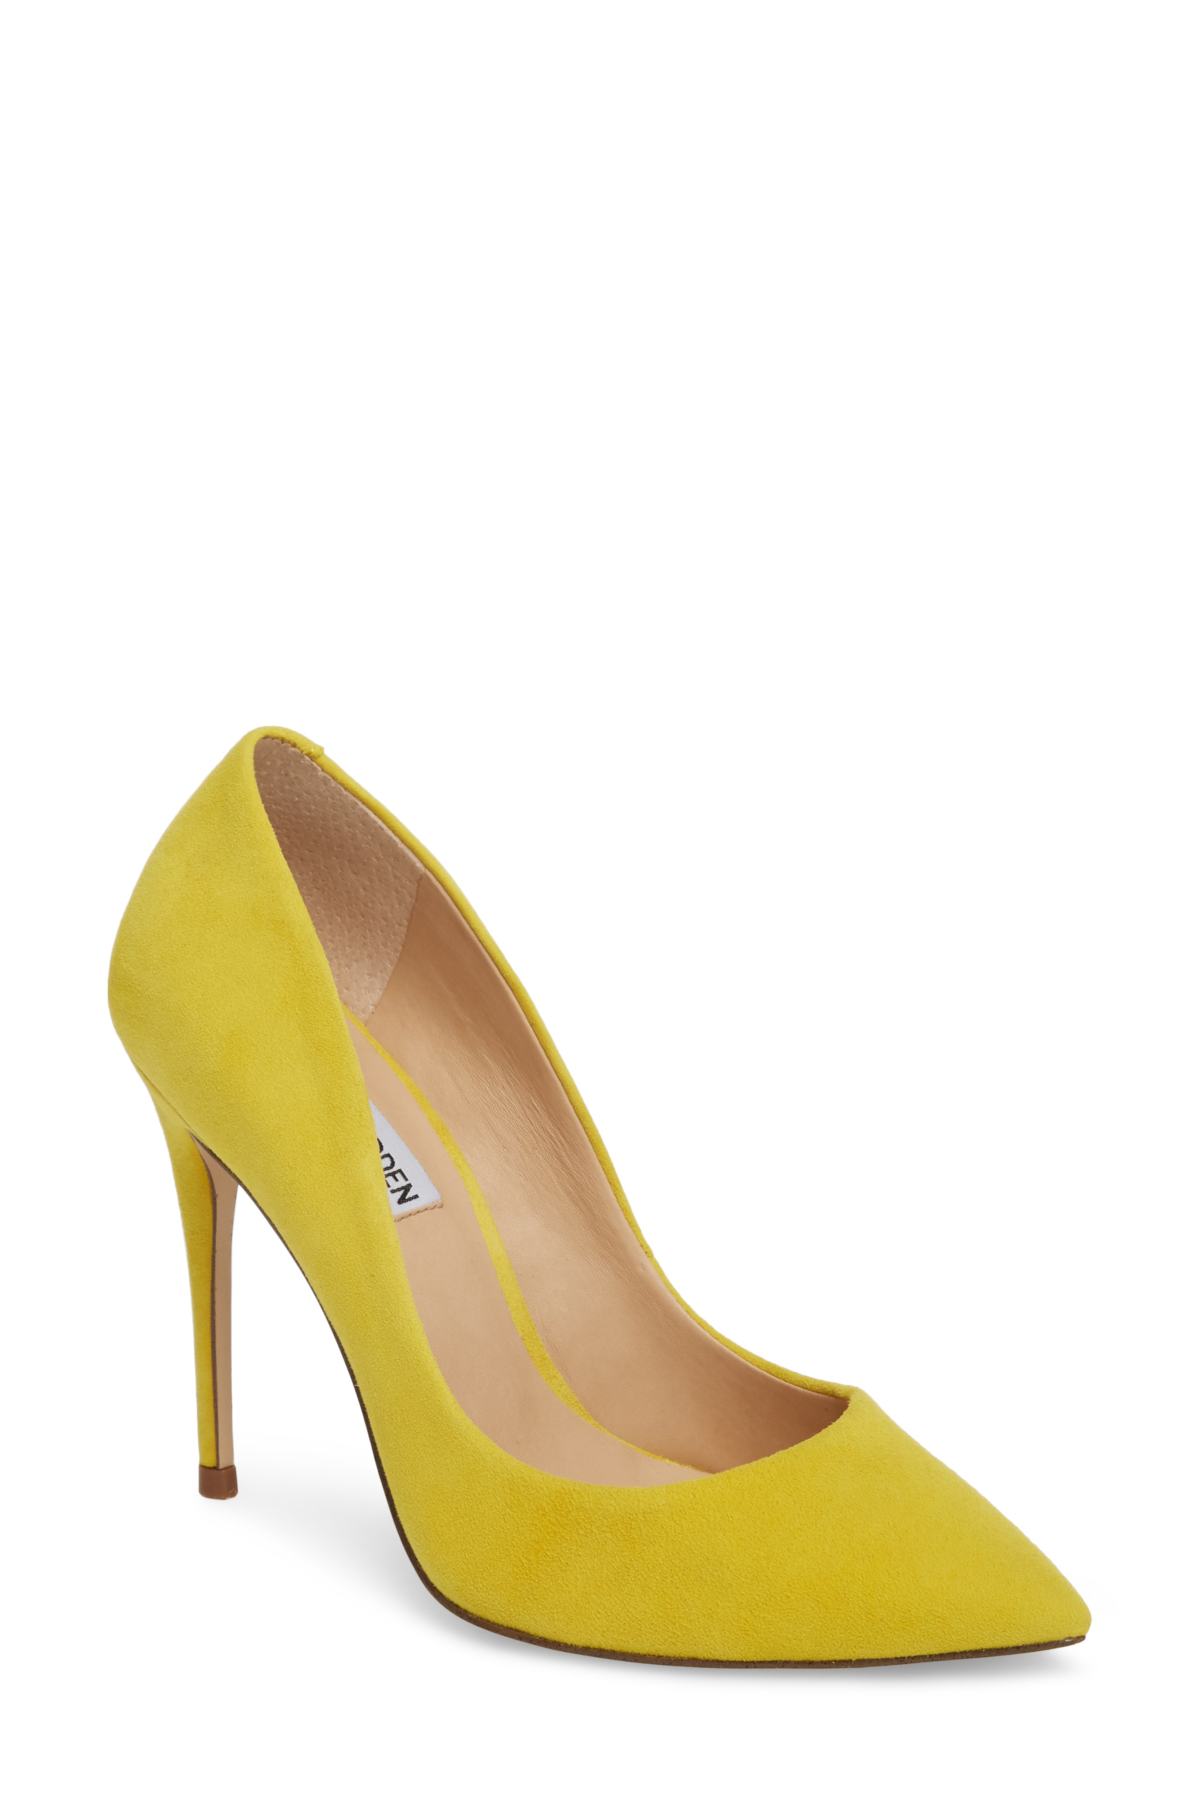 Steve Madden Womens Daisie Leather Pointed Toe Classic, Yellow Suede ...